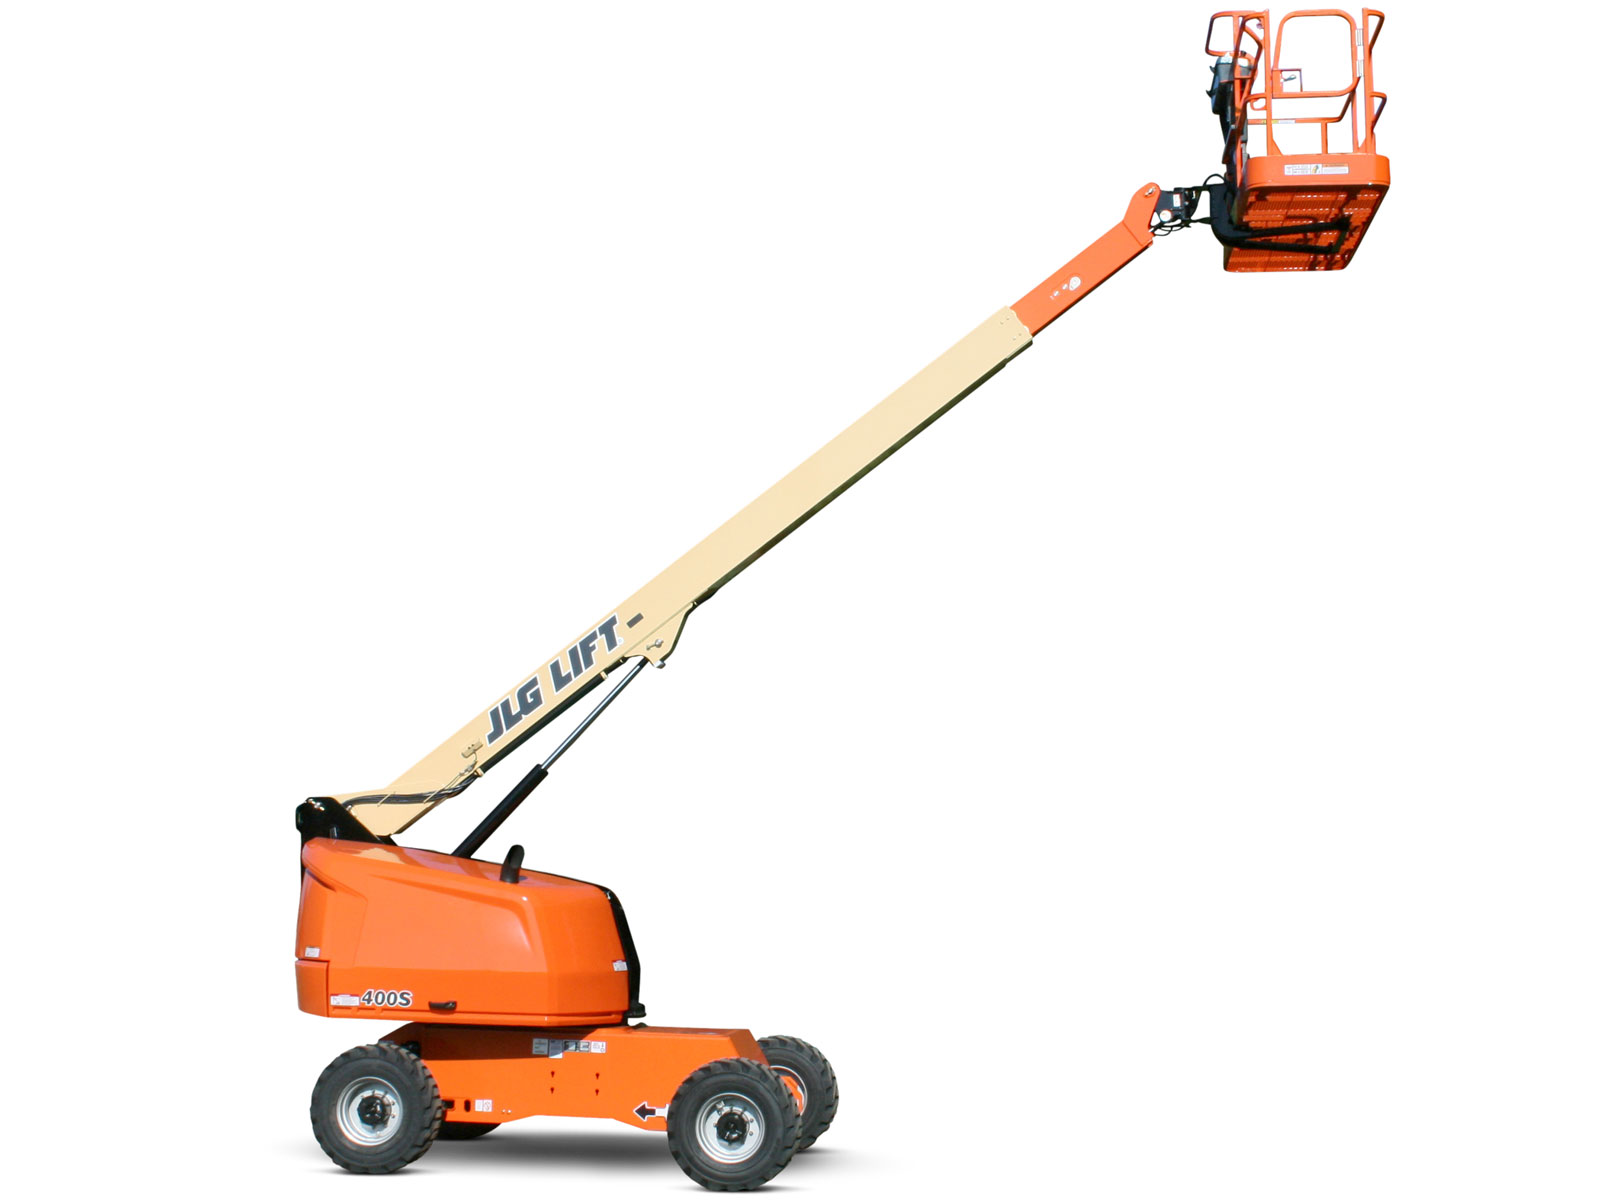 60 foot boom lift for sale